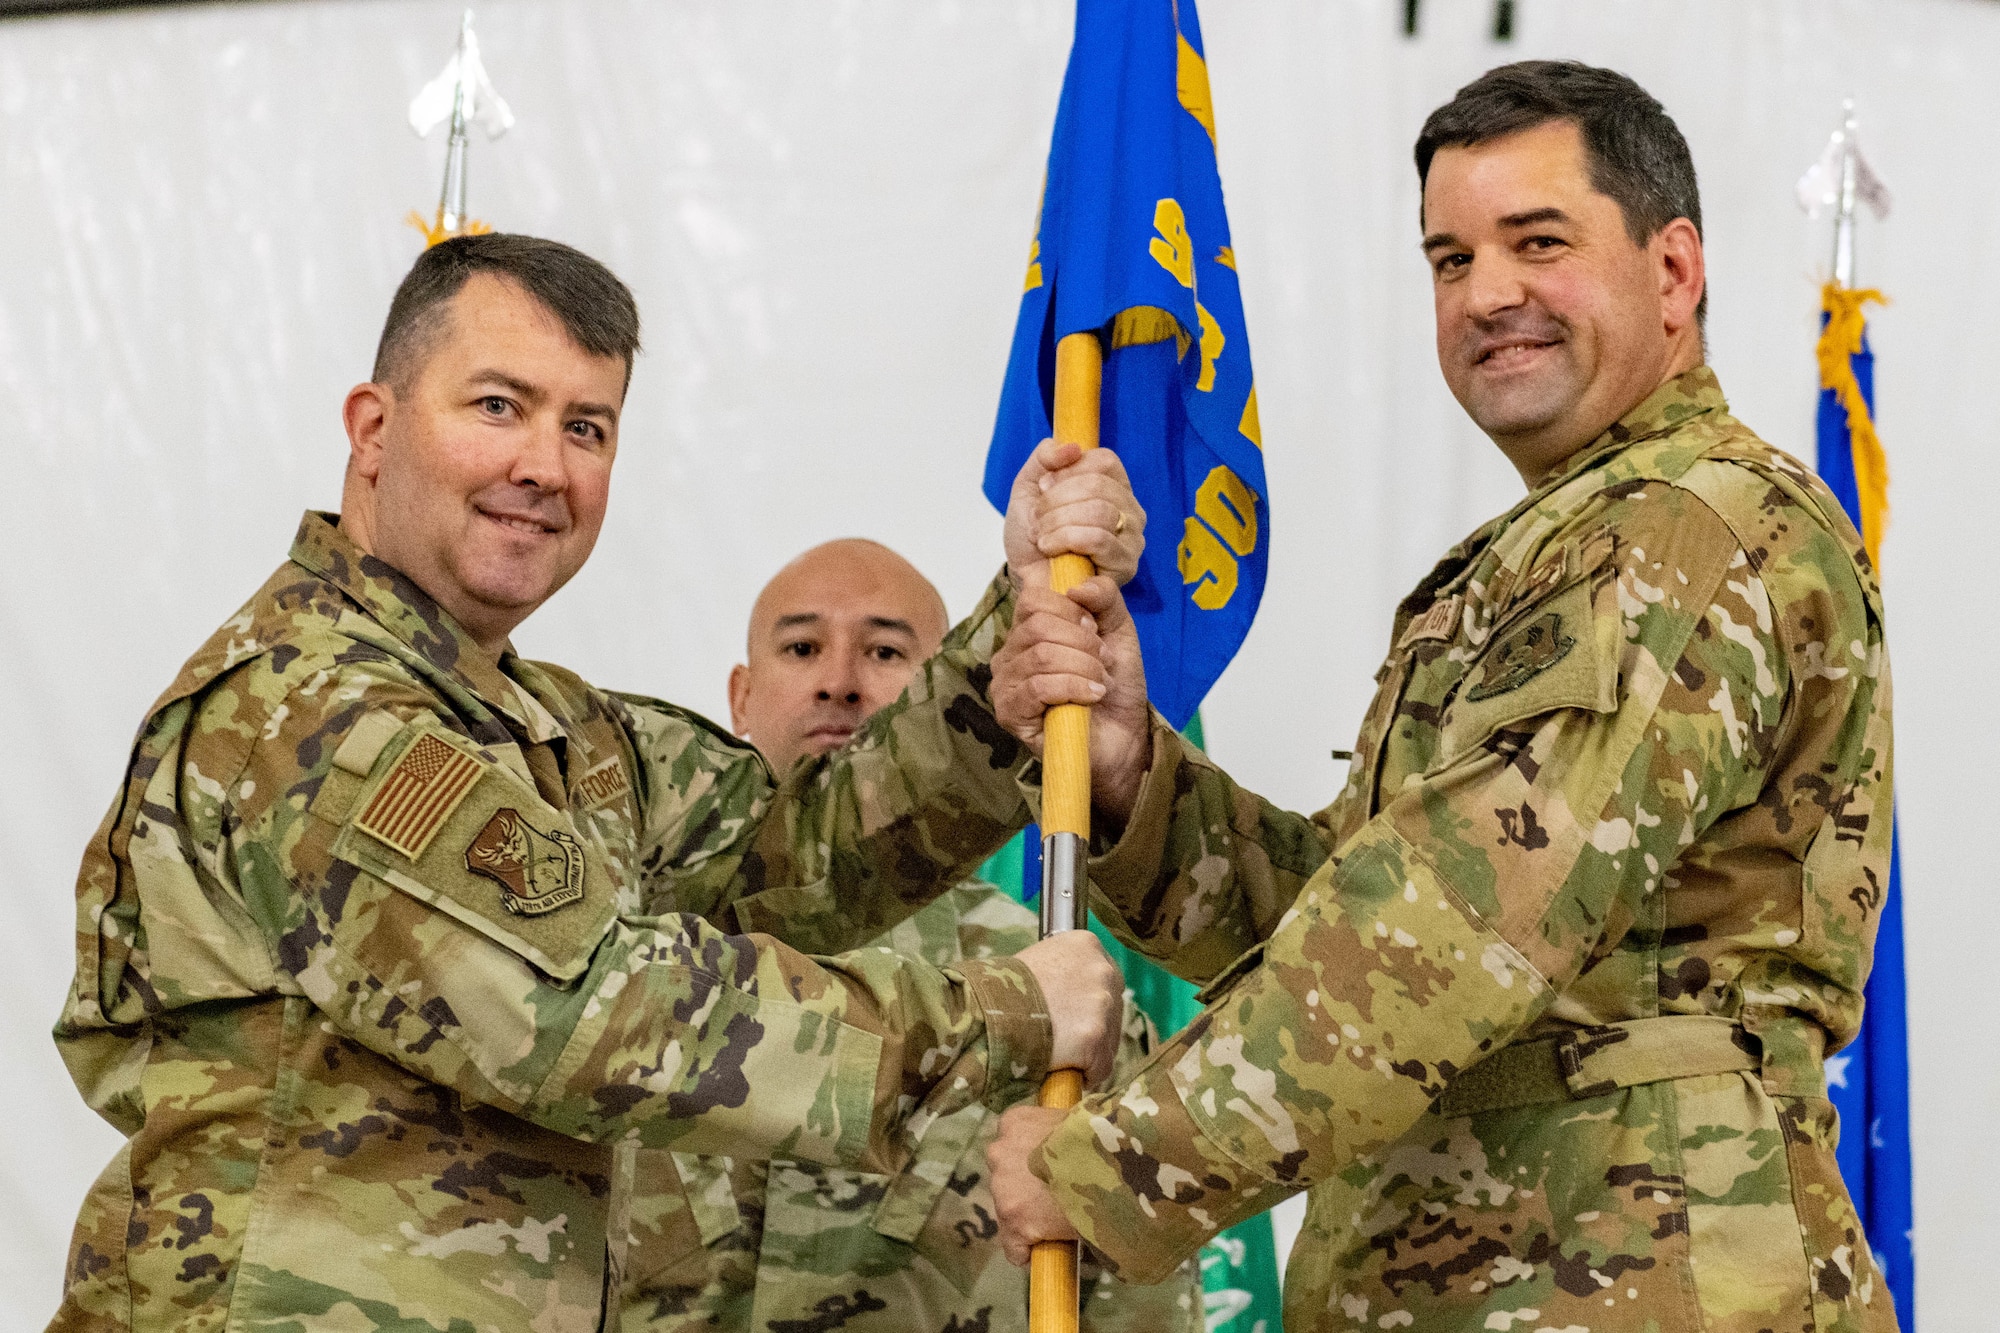 908th EARS receives new commander